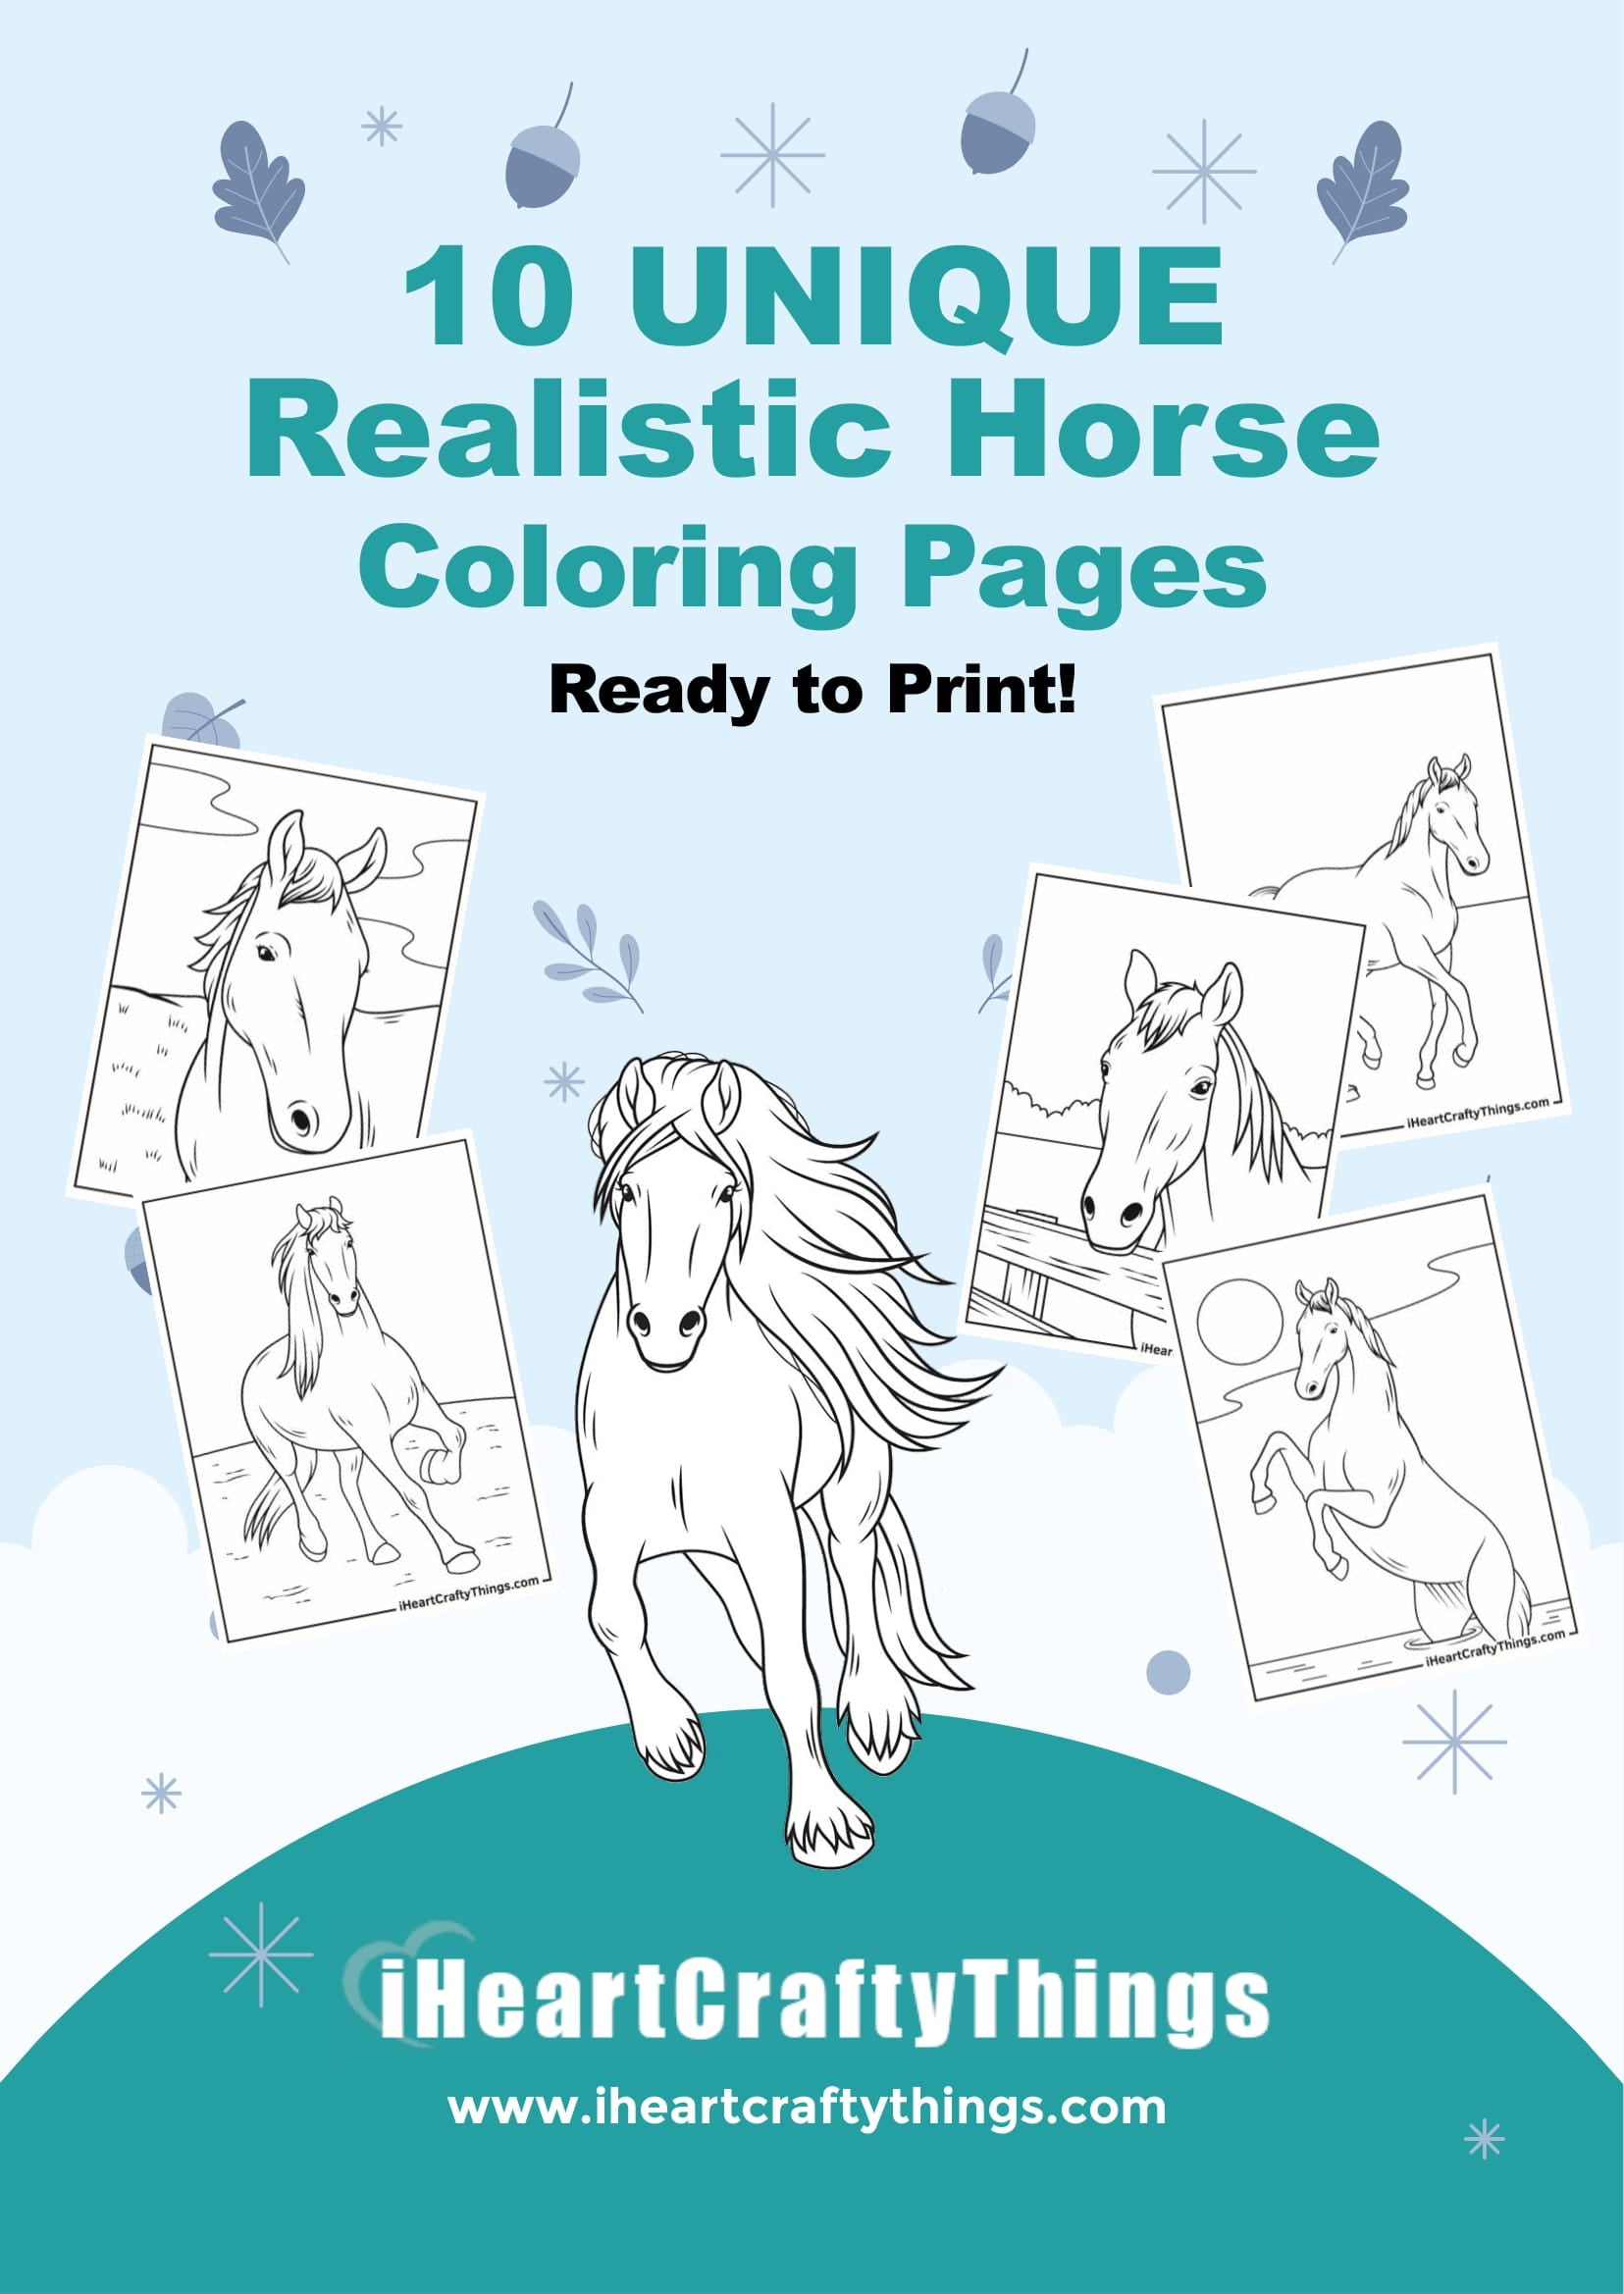 Realistic horse coloring pages â i heart crafty things